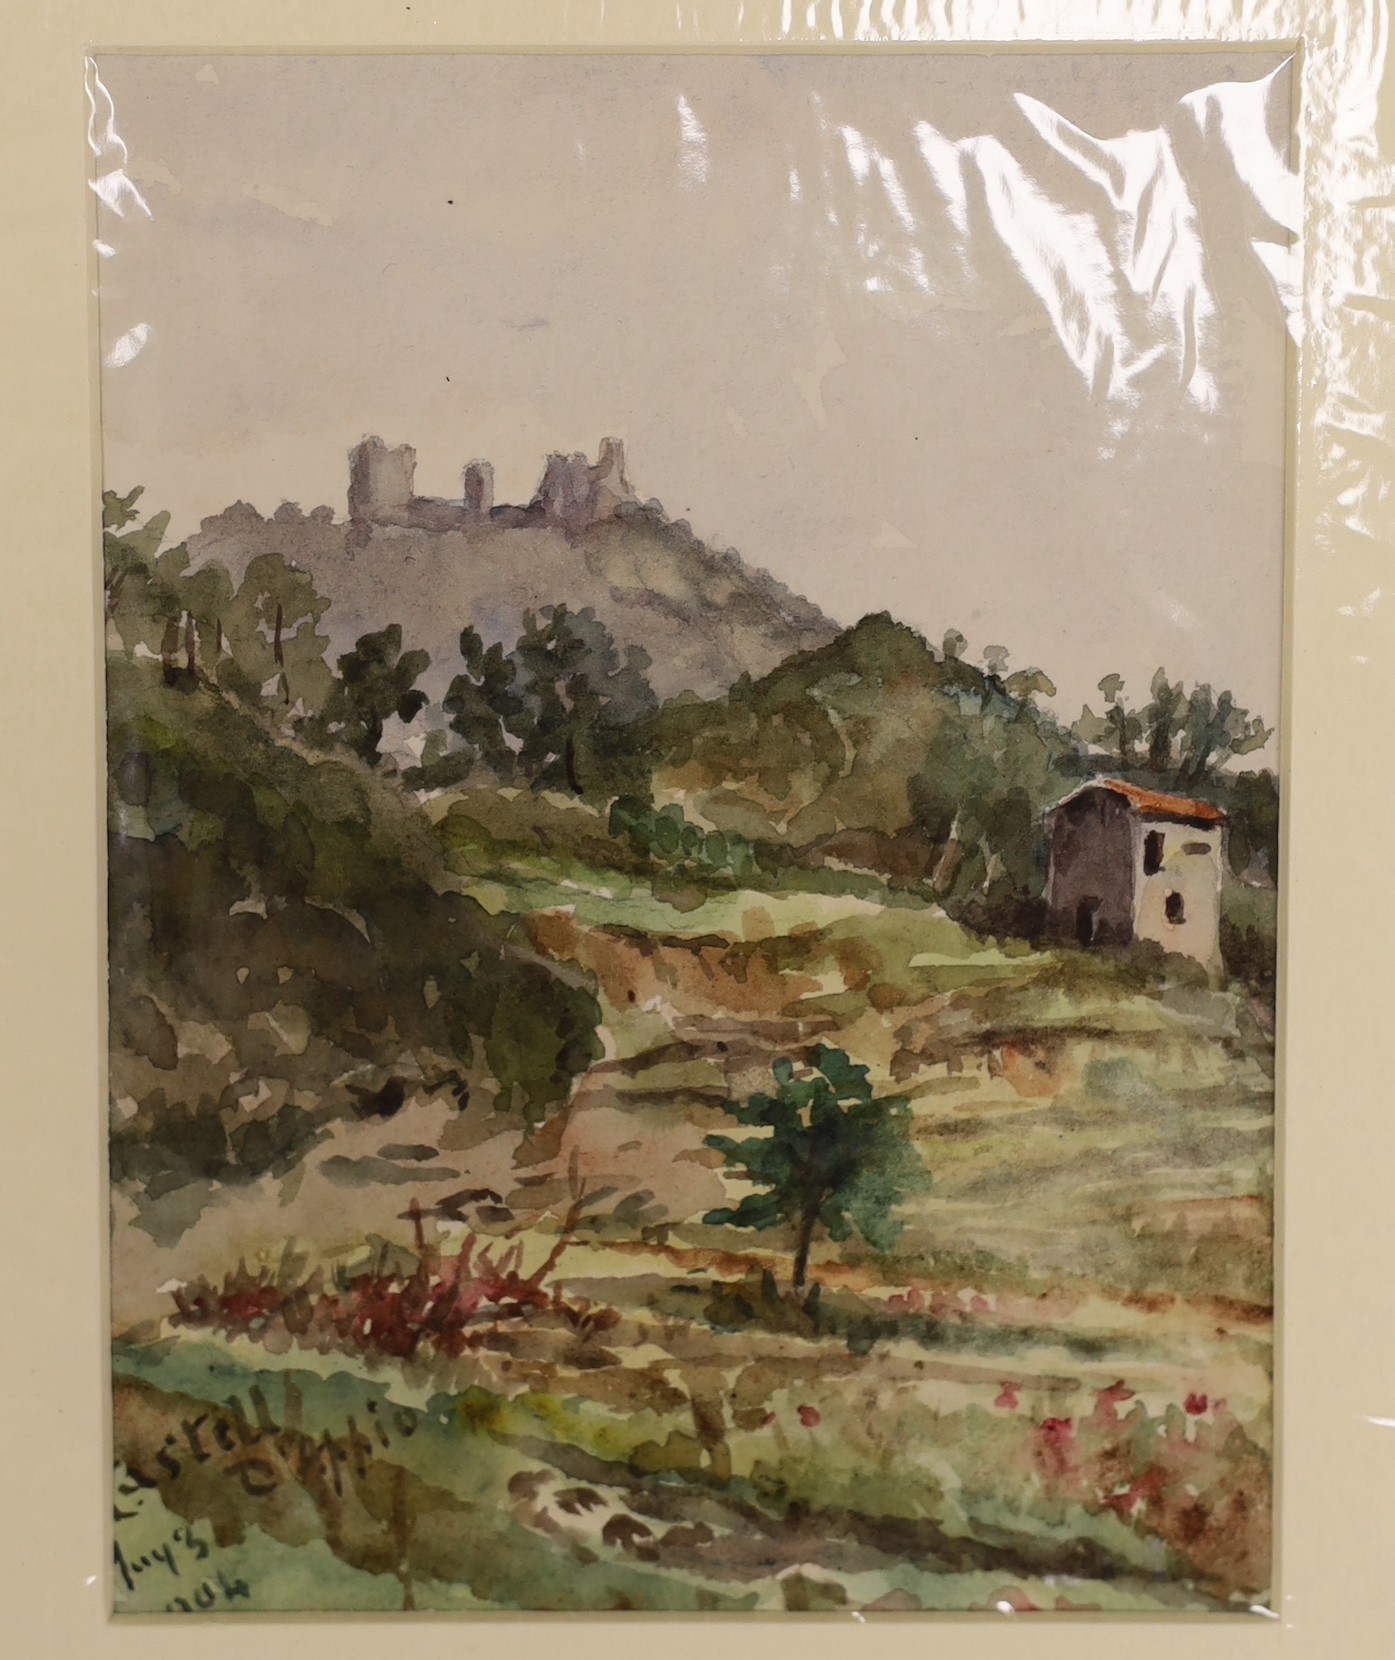 Elizabeth Denston and Robert Hay Drummond, a collection of assorted unframed watercolours, Loch scenes and Views along the Cotes d'Azur, largest 23 x 12cm